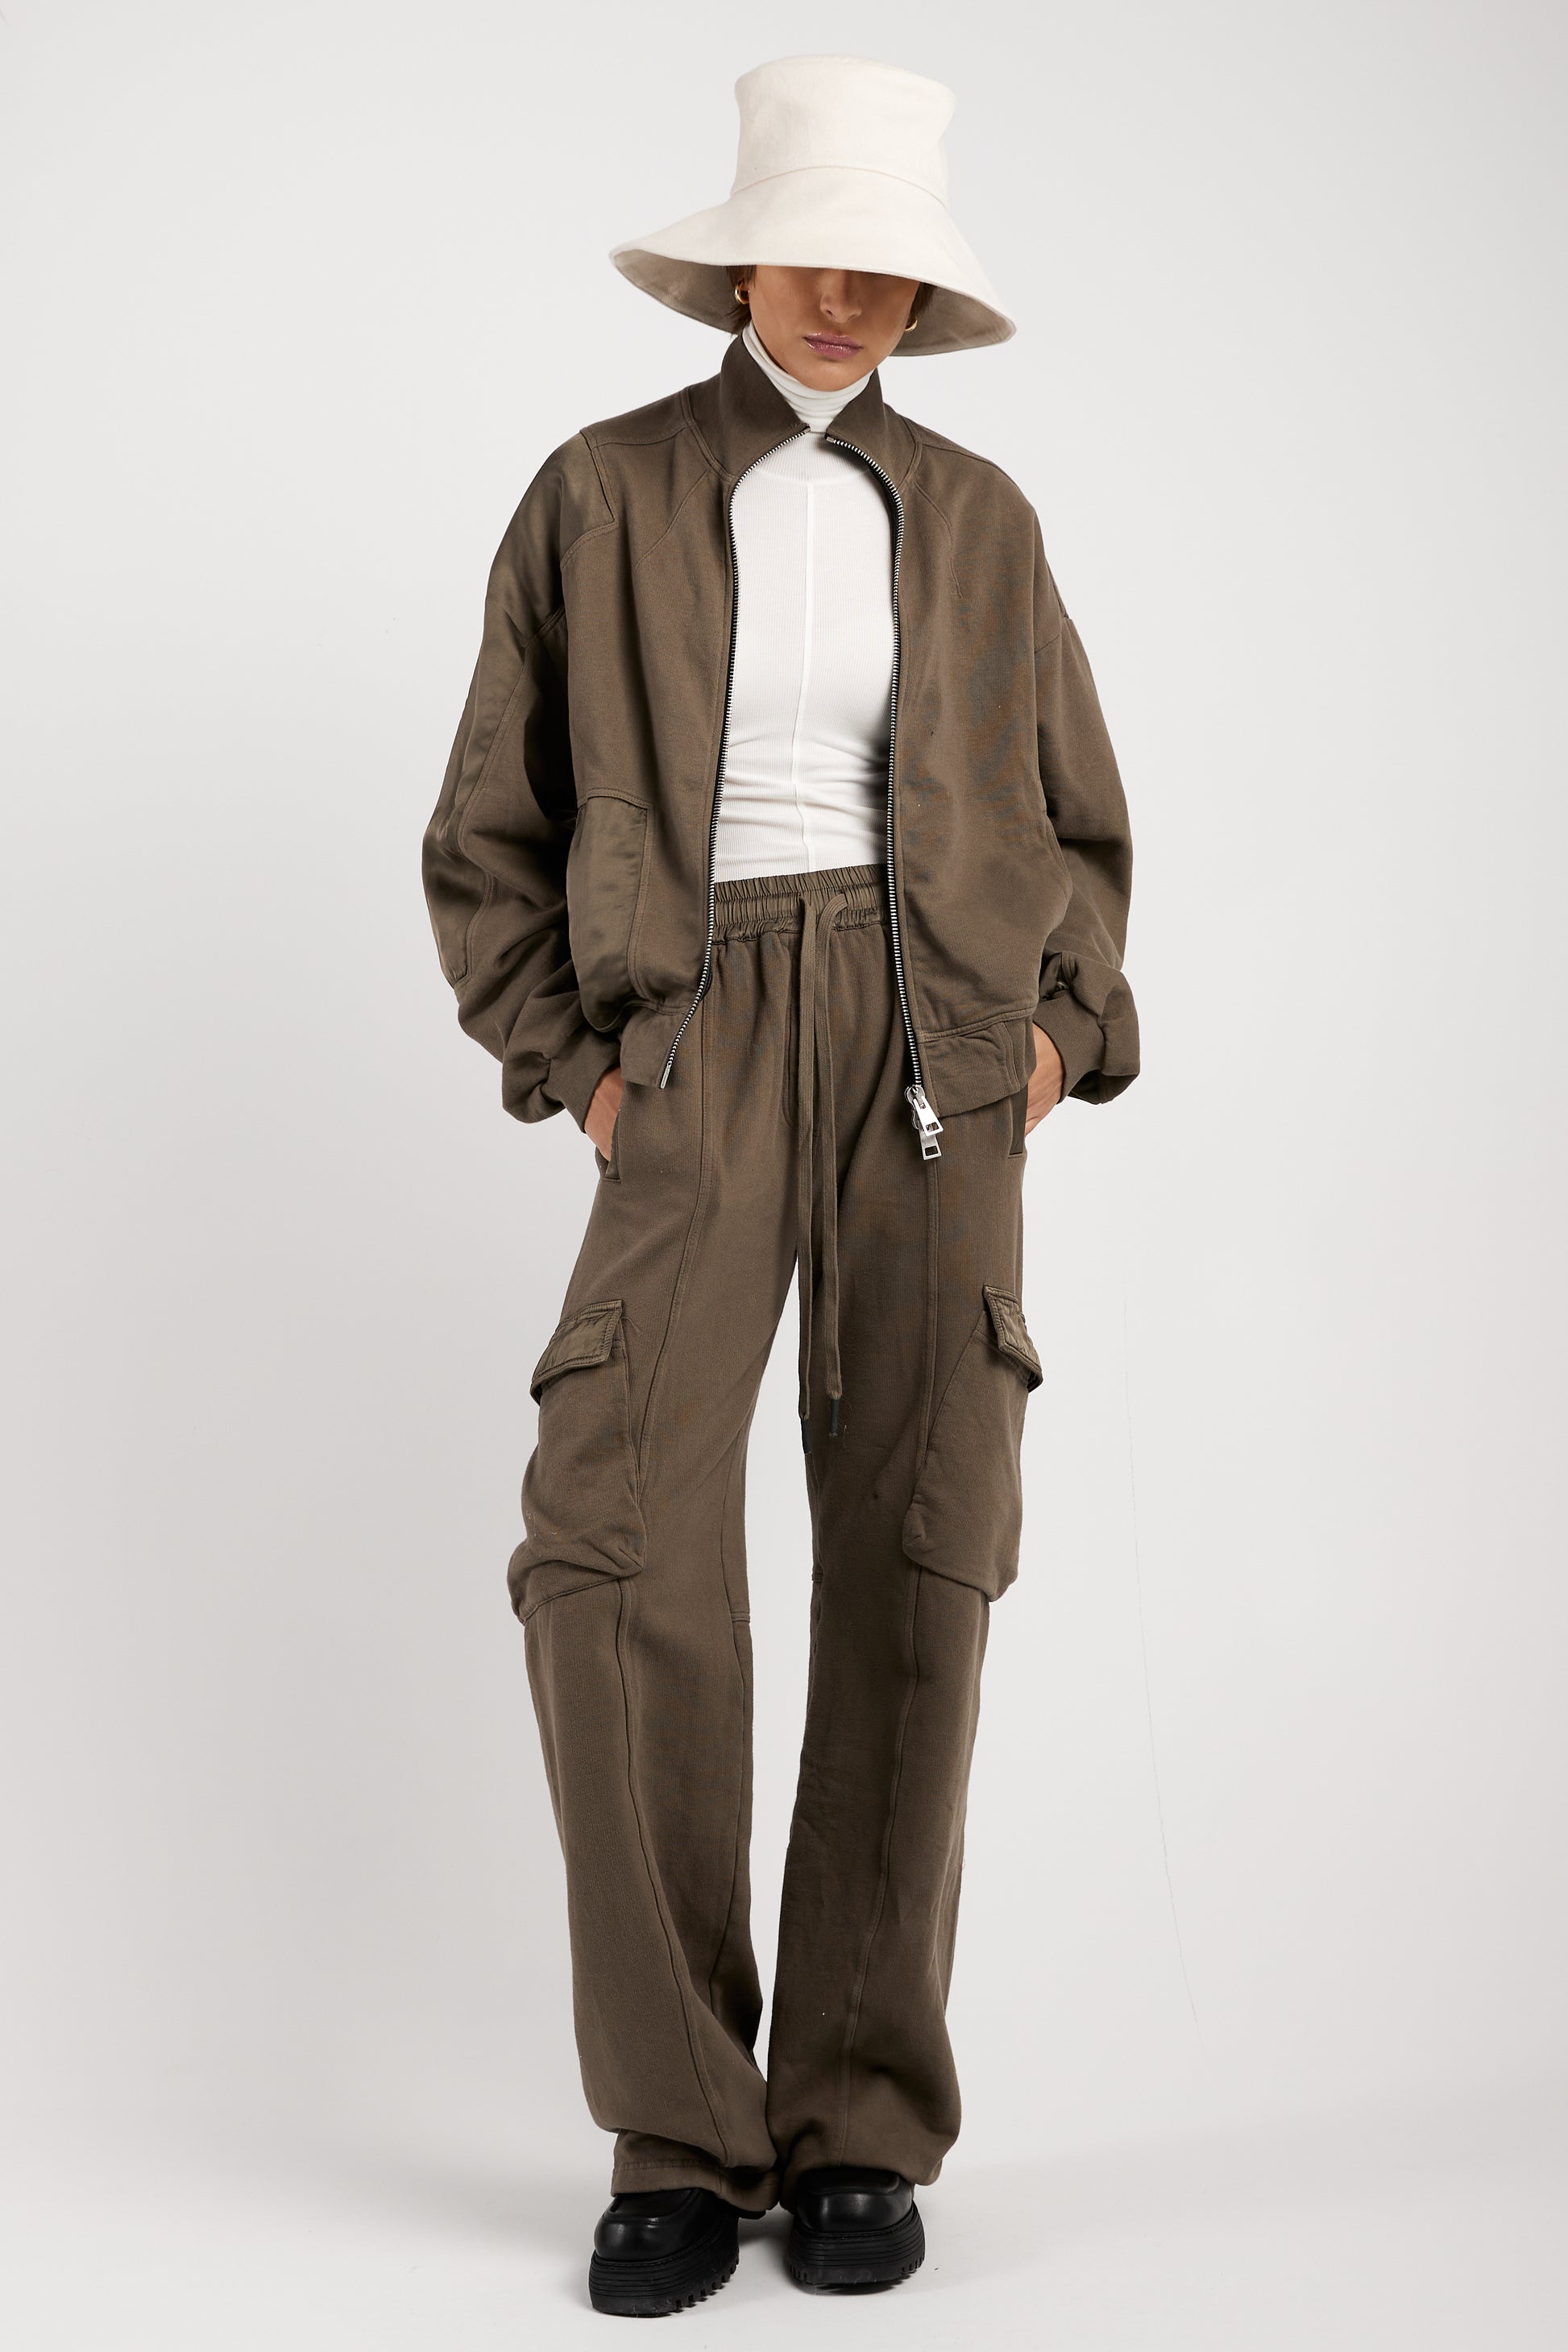 ANDREA YA'AQOV Relaxed Cargo Pant in Taupe